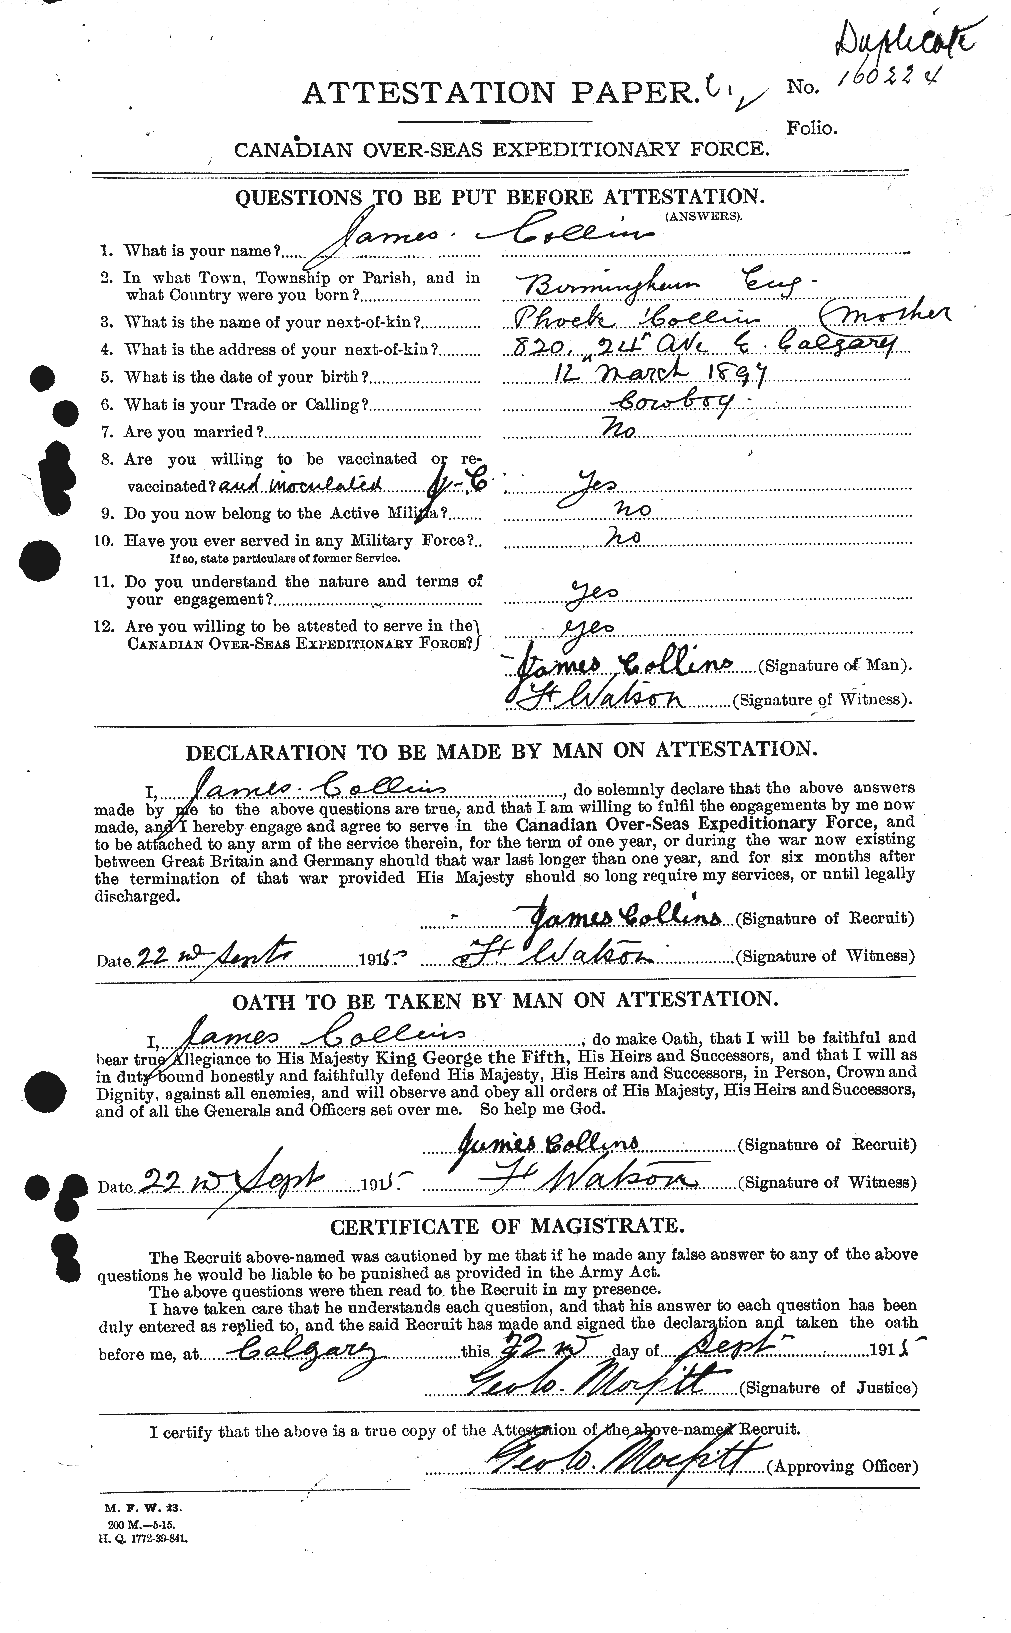 Personnel Records of the First World War - CEF 069968a